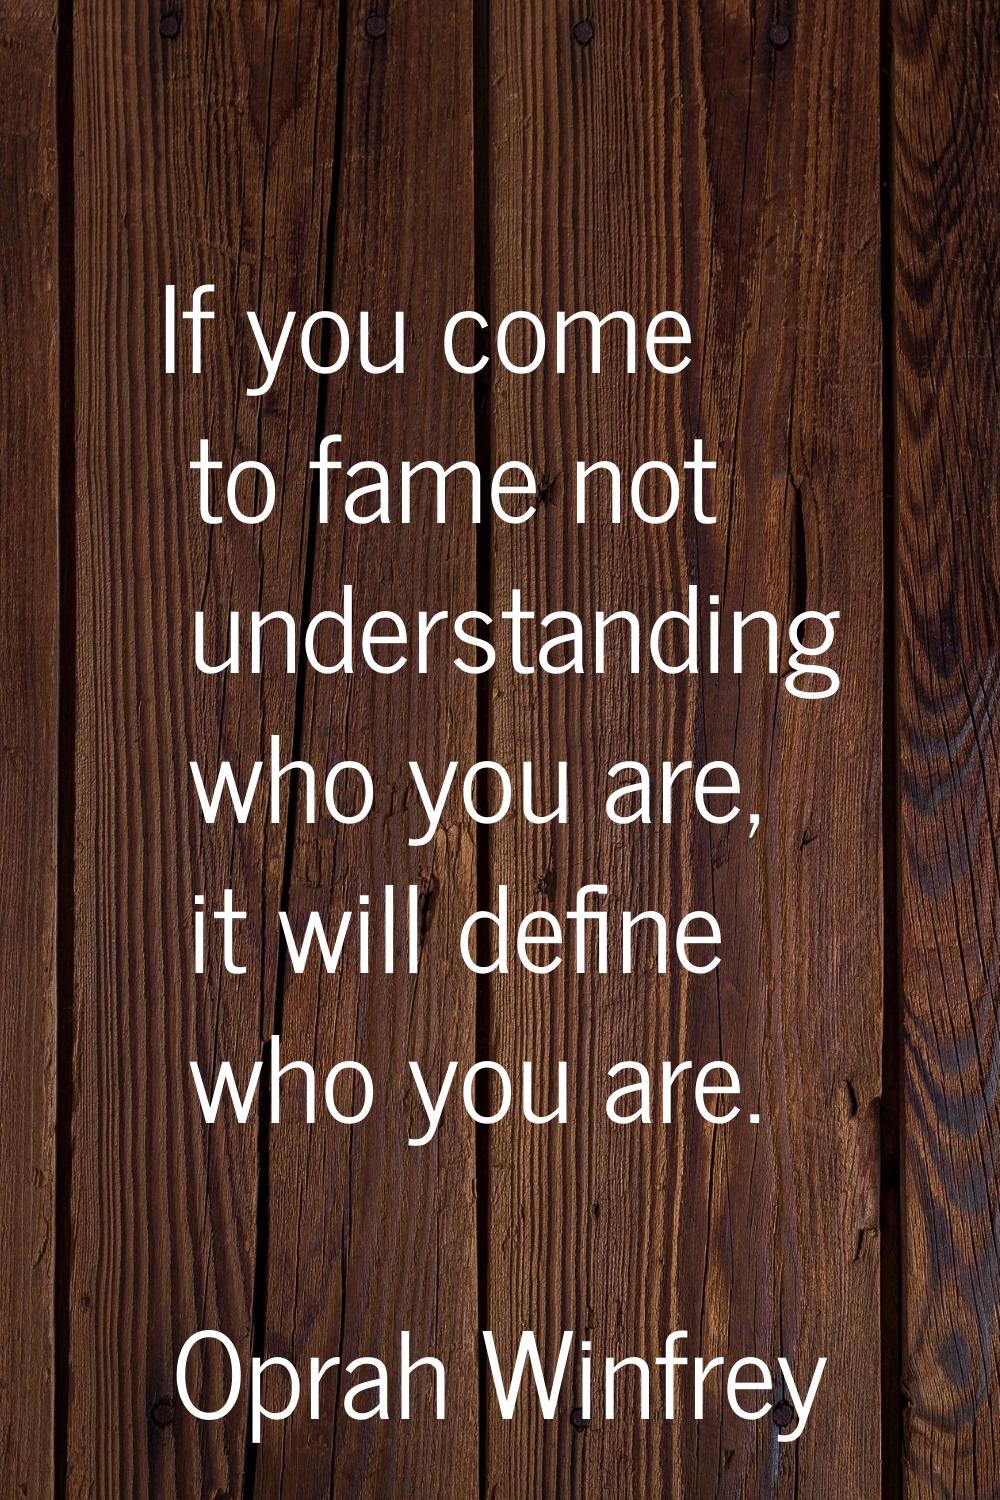 If you come to fame not understanding who you are, it will define who you are.